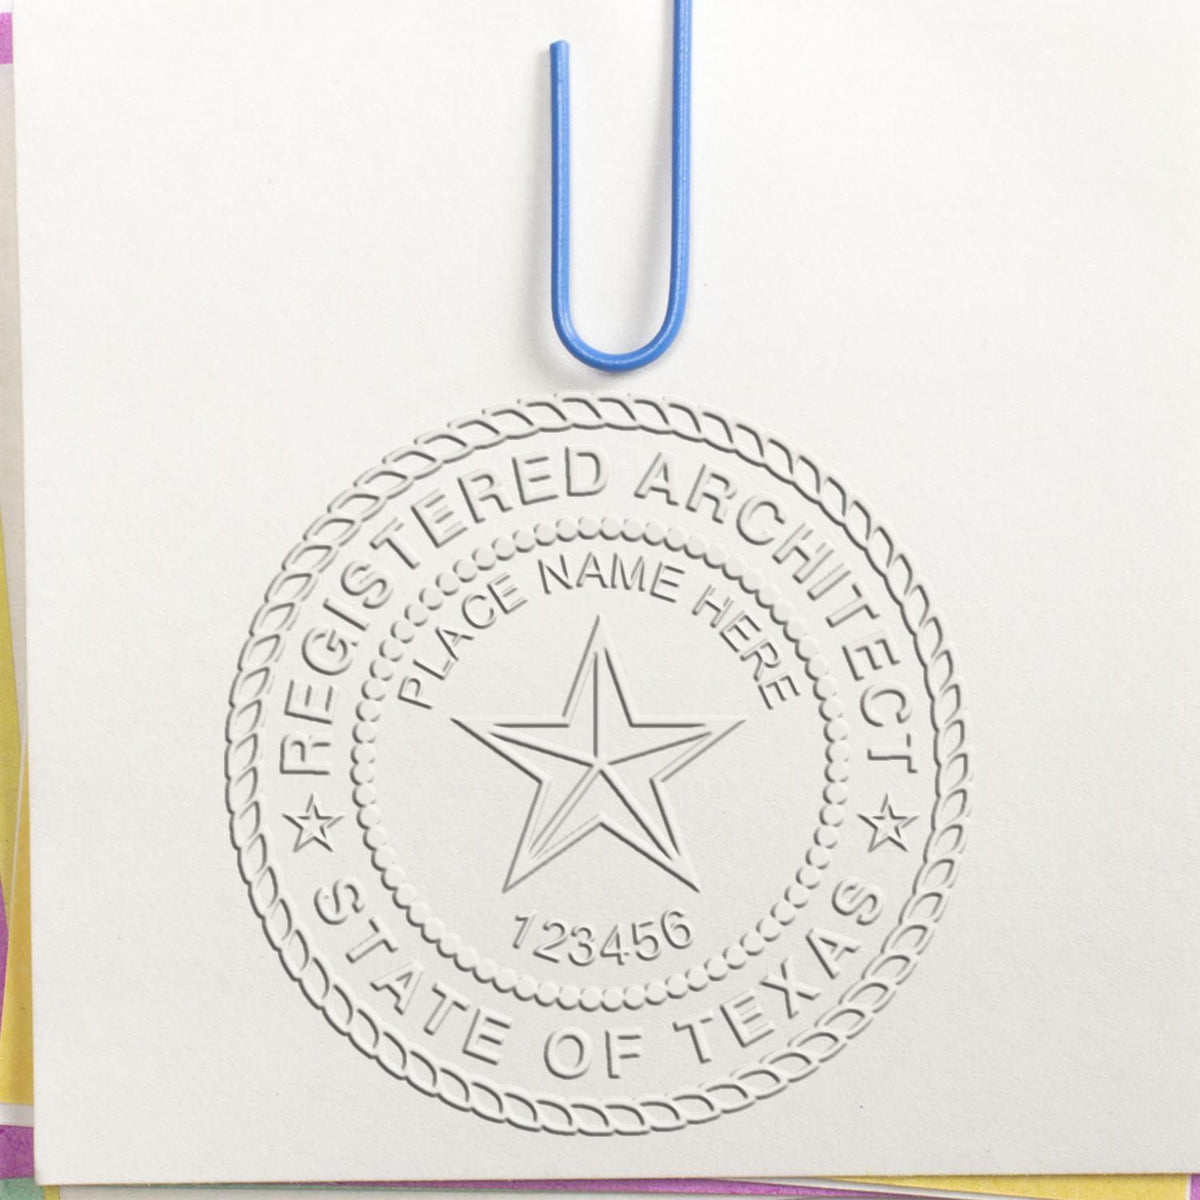 An alternative view of the State of Texas Long Reach Architectural Embossing Seal stamped on a sheet of paper showing the image in use